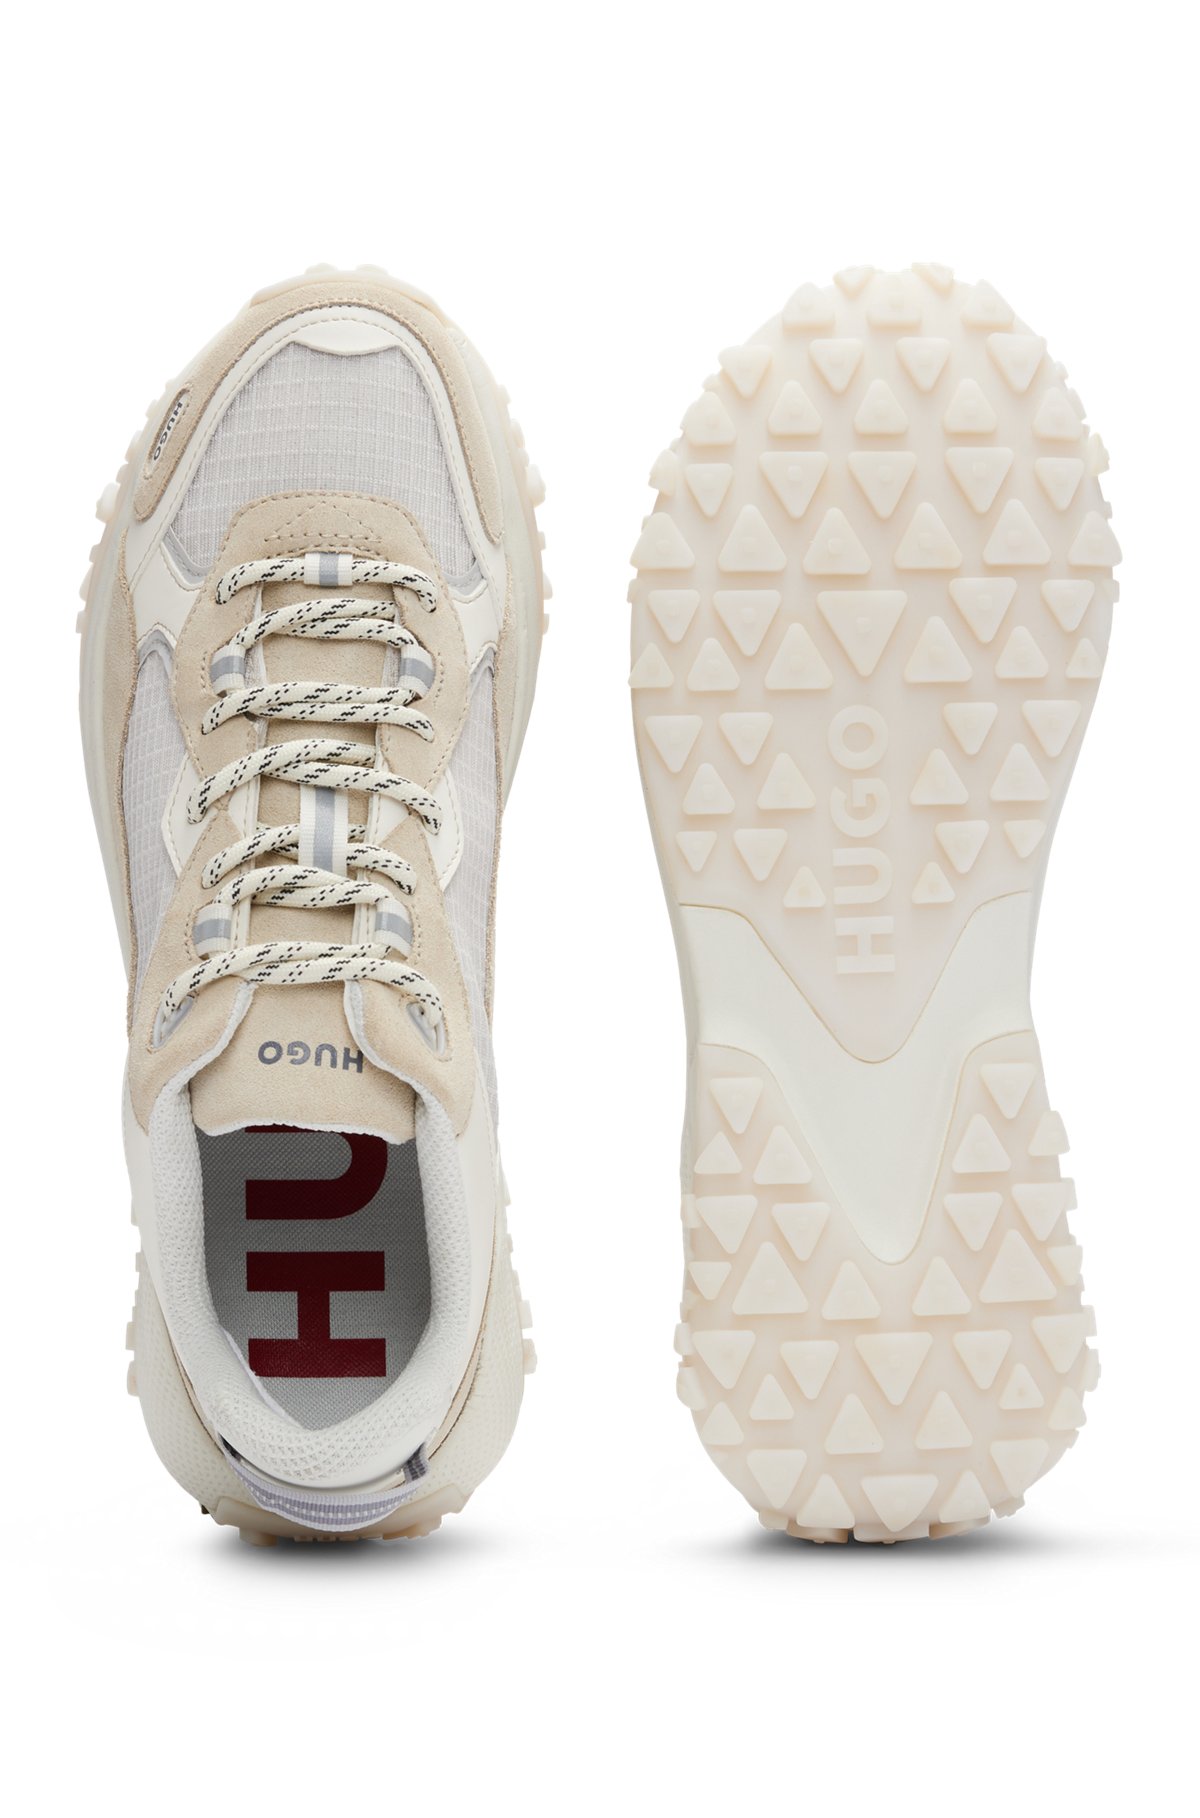 Mixed-material trainers with contrast details, Beige